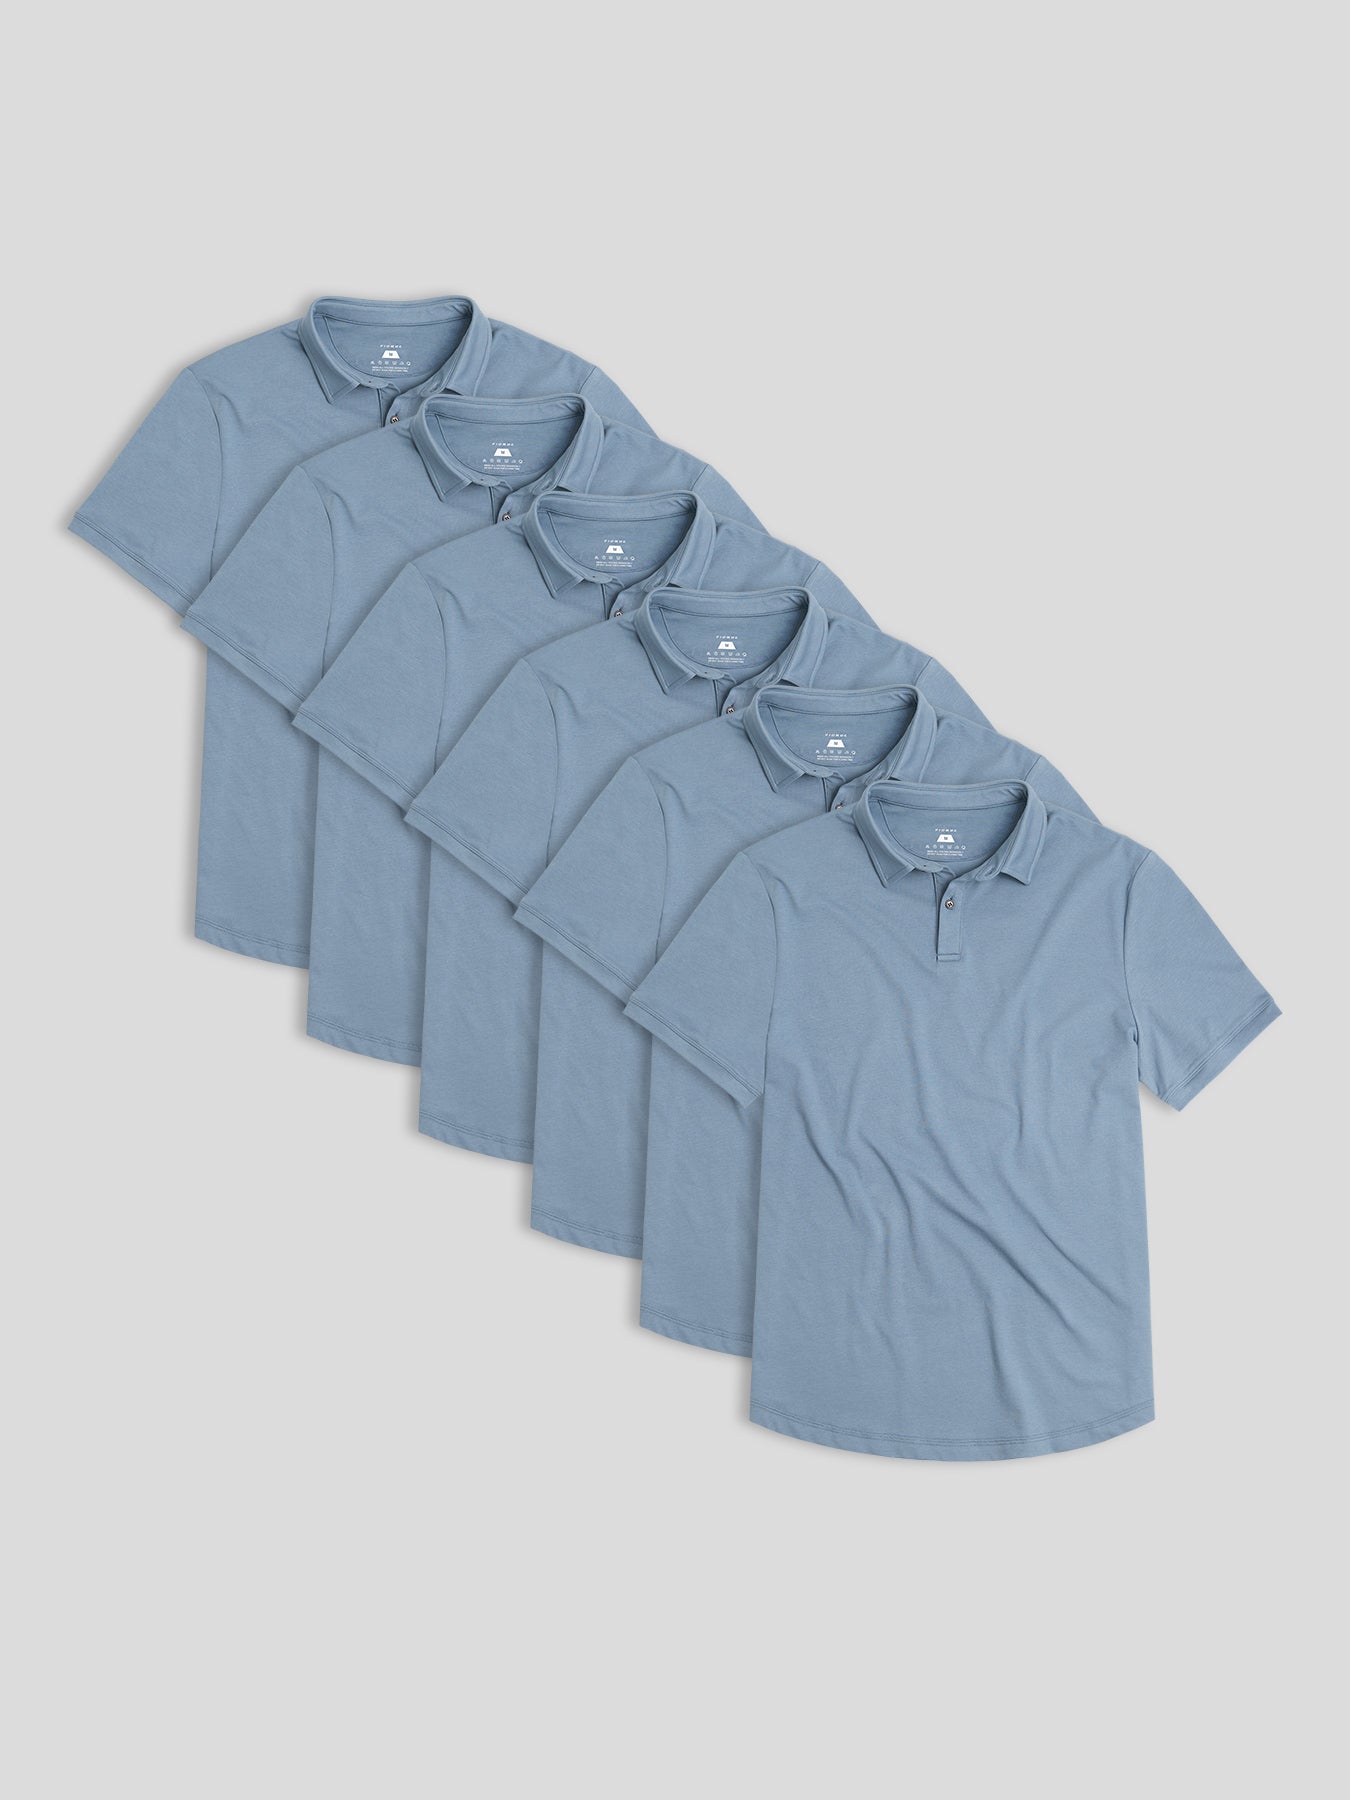 StayCool 2.0 Polo 6-Pack